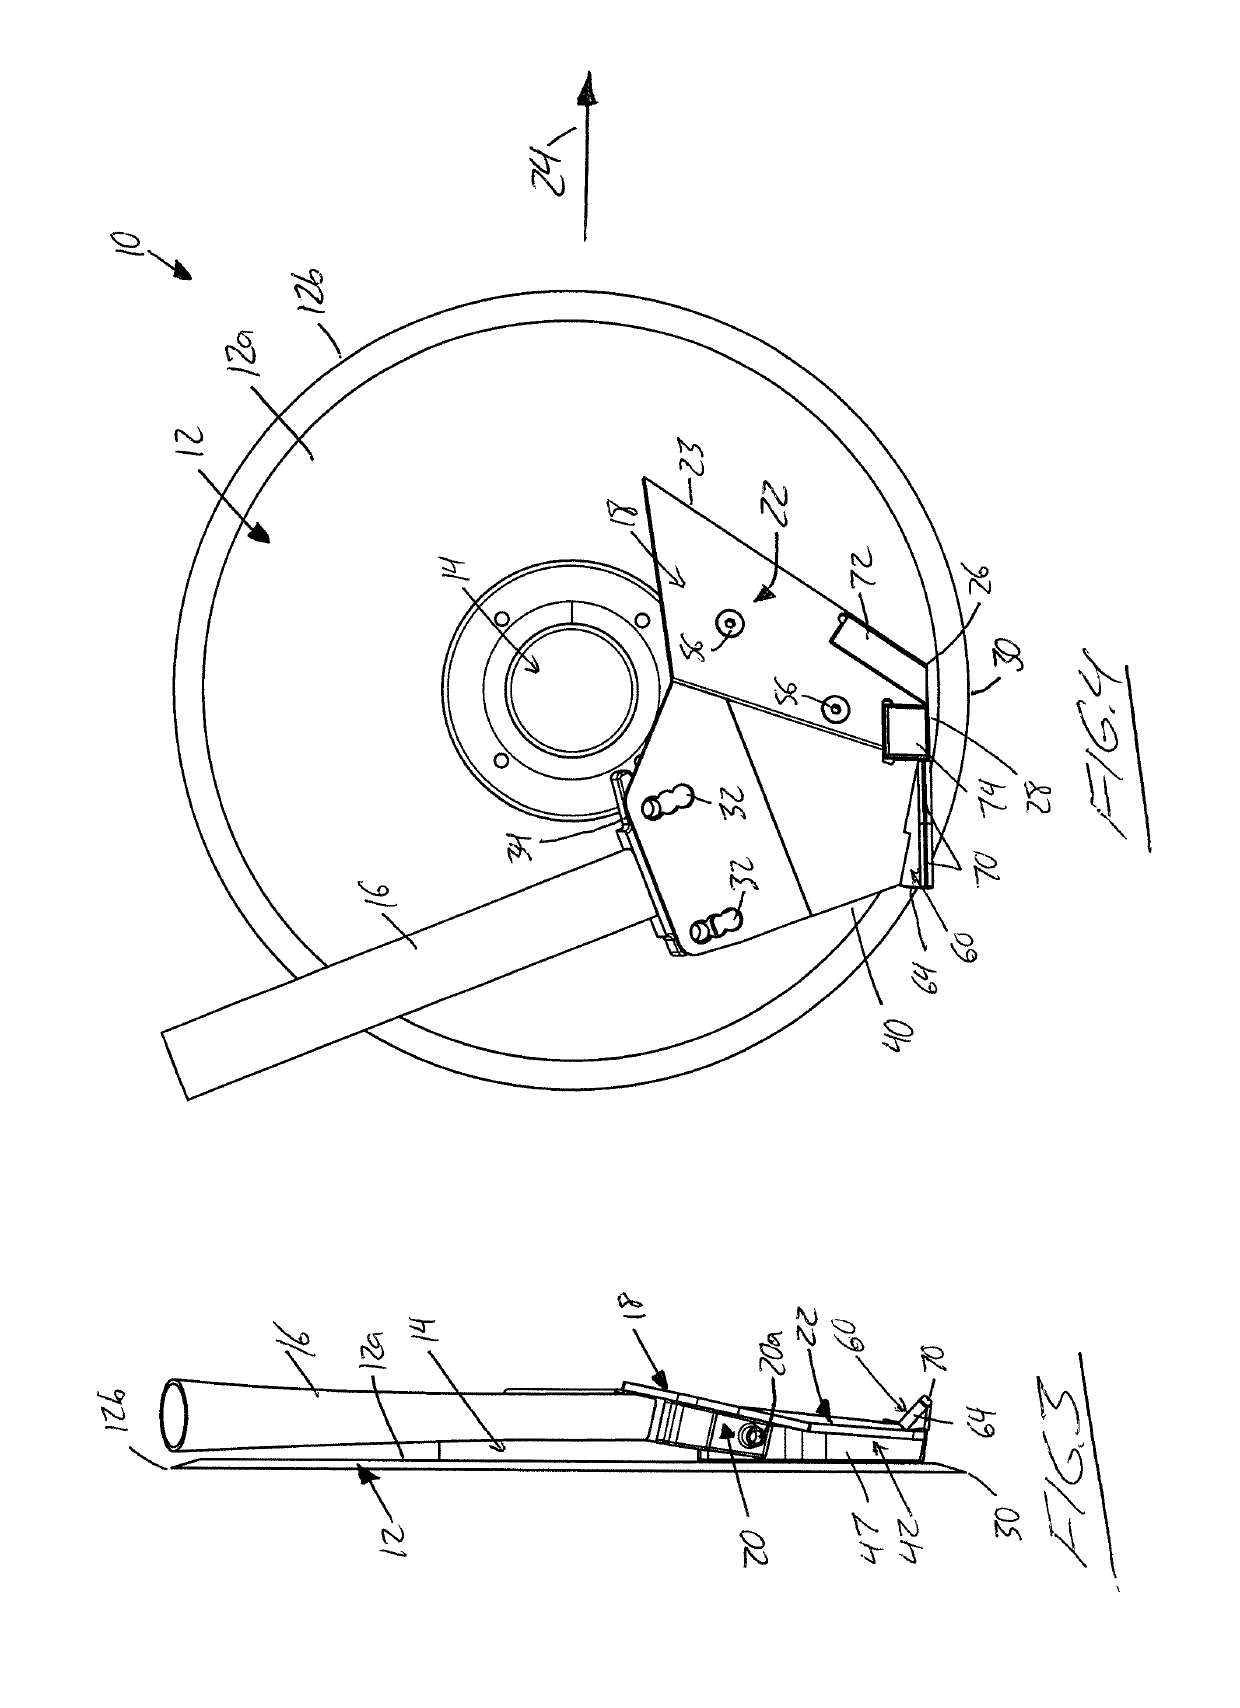 Disc opener scraper with insert for straw wrap prevention, wear reduction and seed guidance, and welded slot-positioned wing member